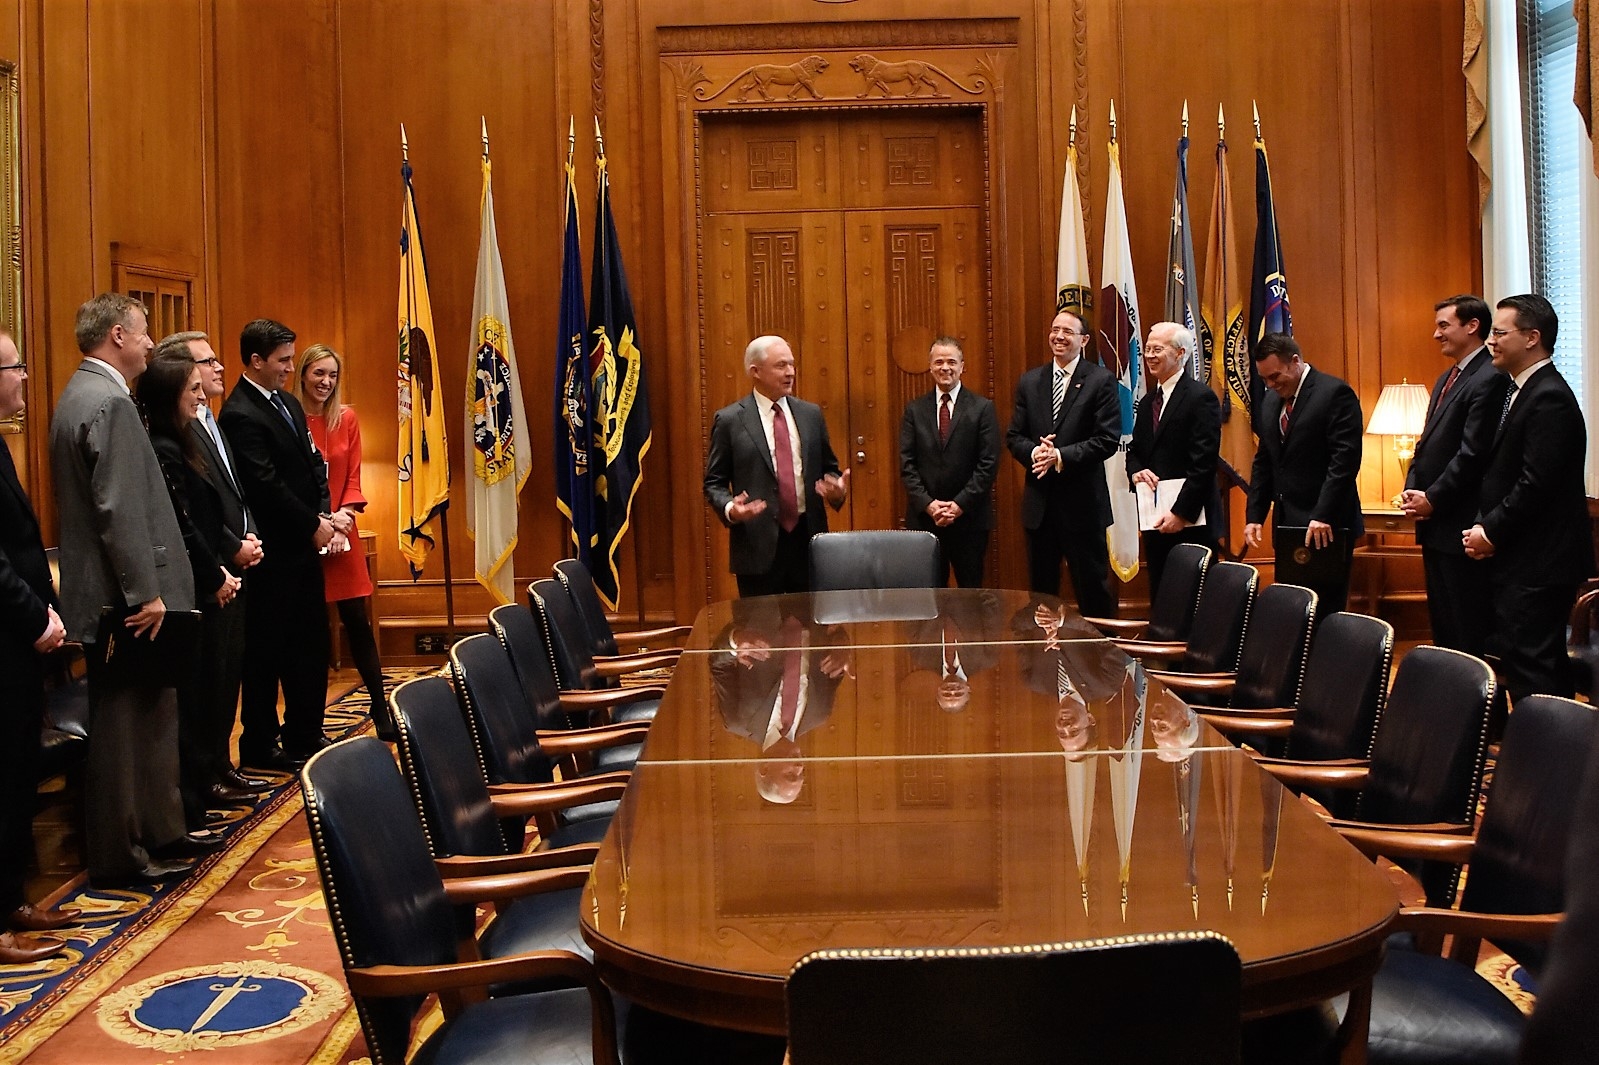 Attorney General Sessions meets with his staff and department leadership.